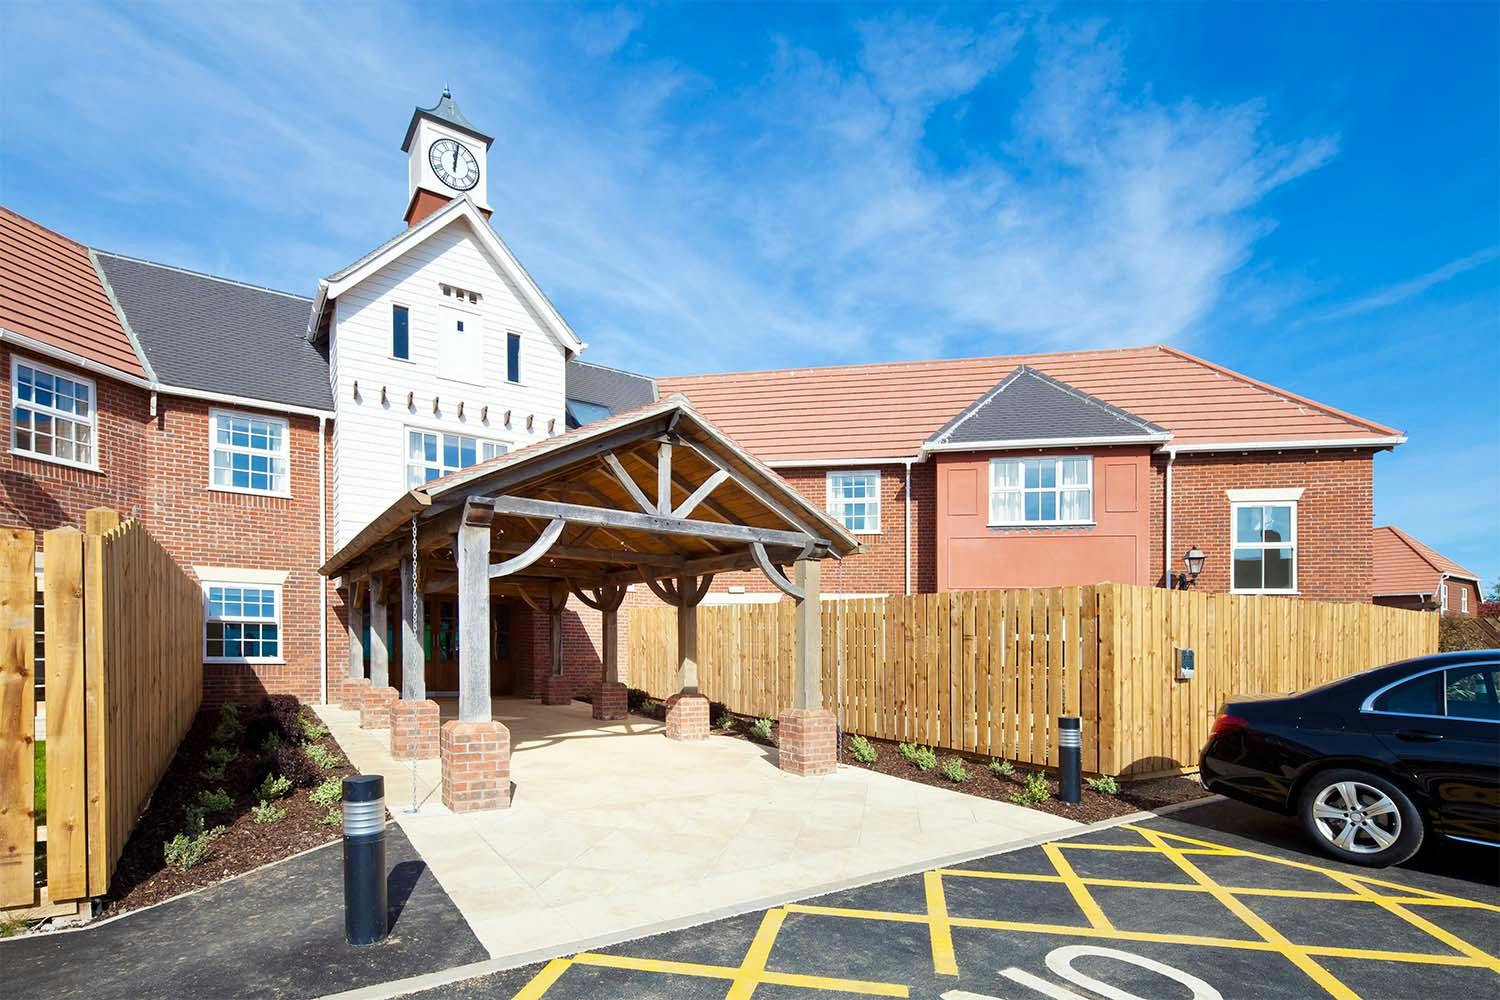 Independent Care Home - Beaumont Manor care home 3